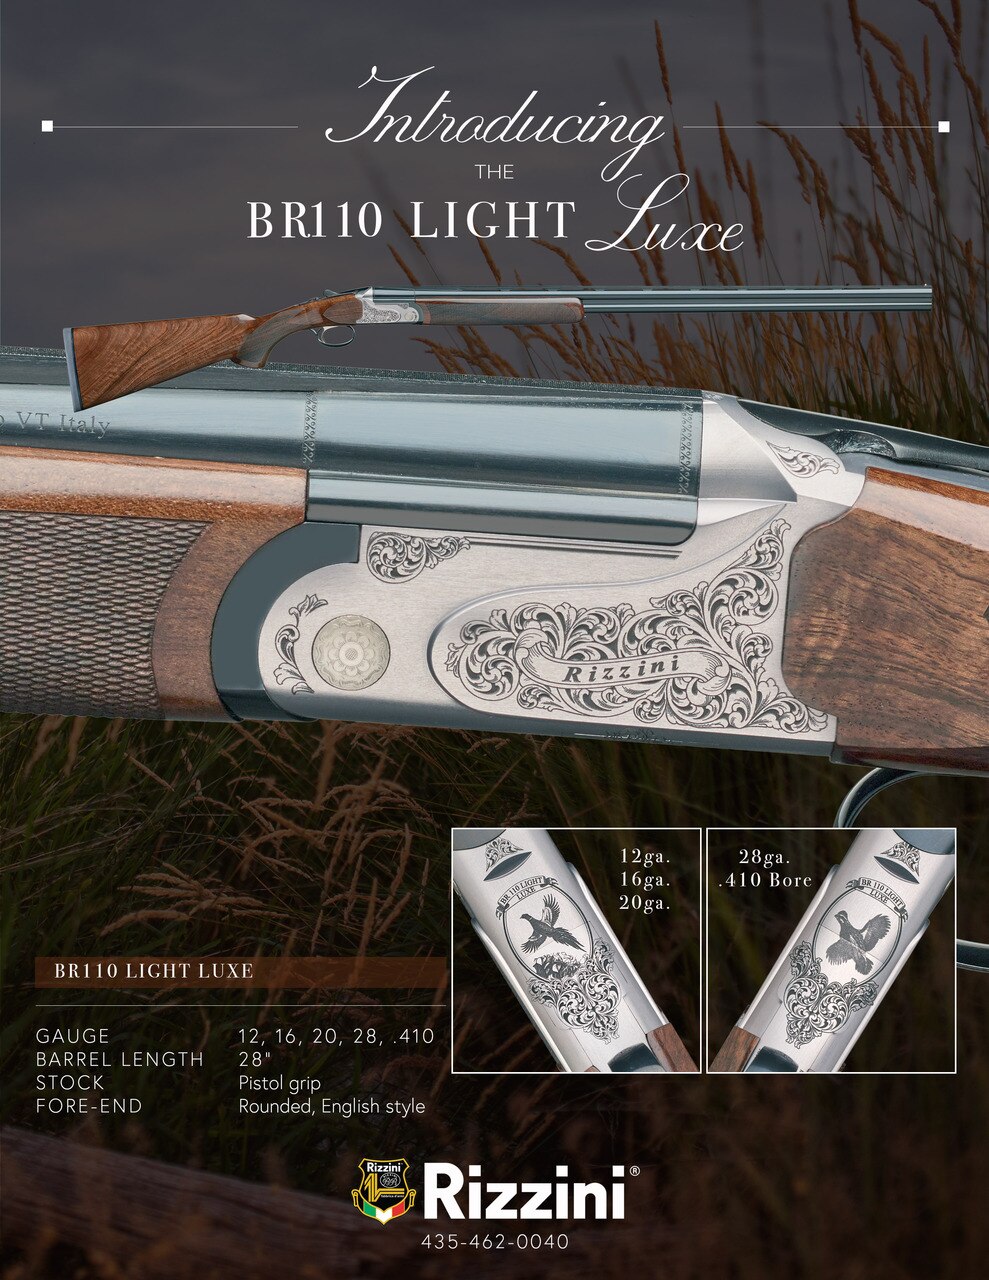 Image of Rizzini BR110 Light Luxe 12g O/U, 28" Barrel, Pistol Grip Stock, Rounded English Style Fore-end